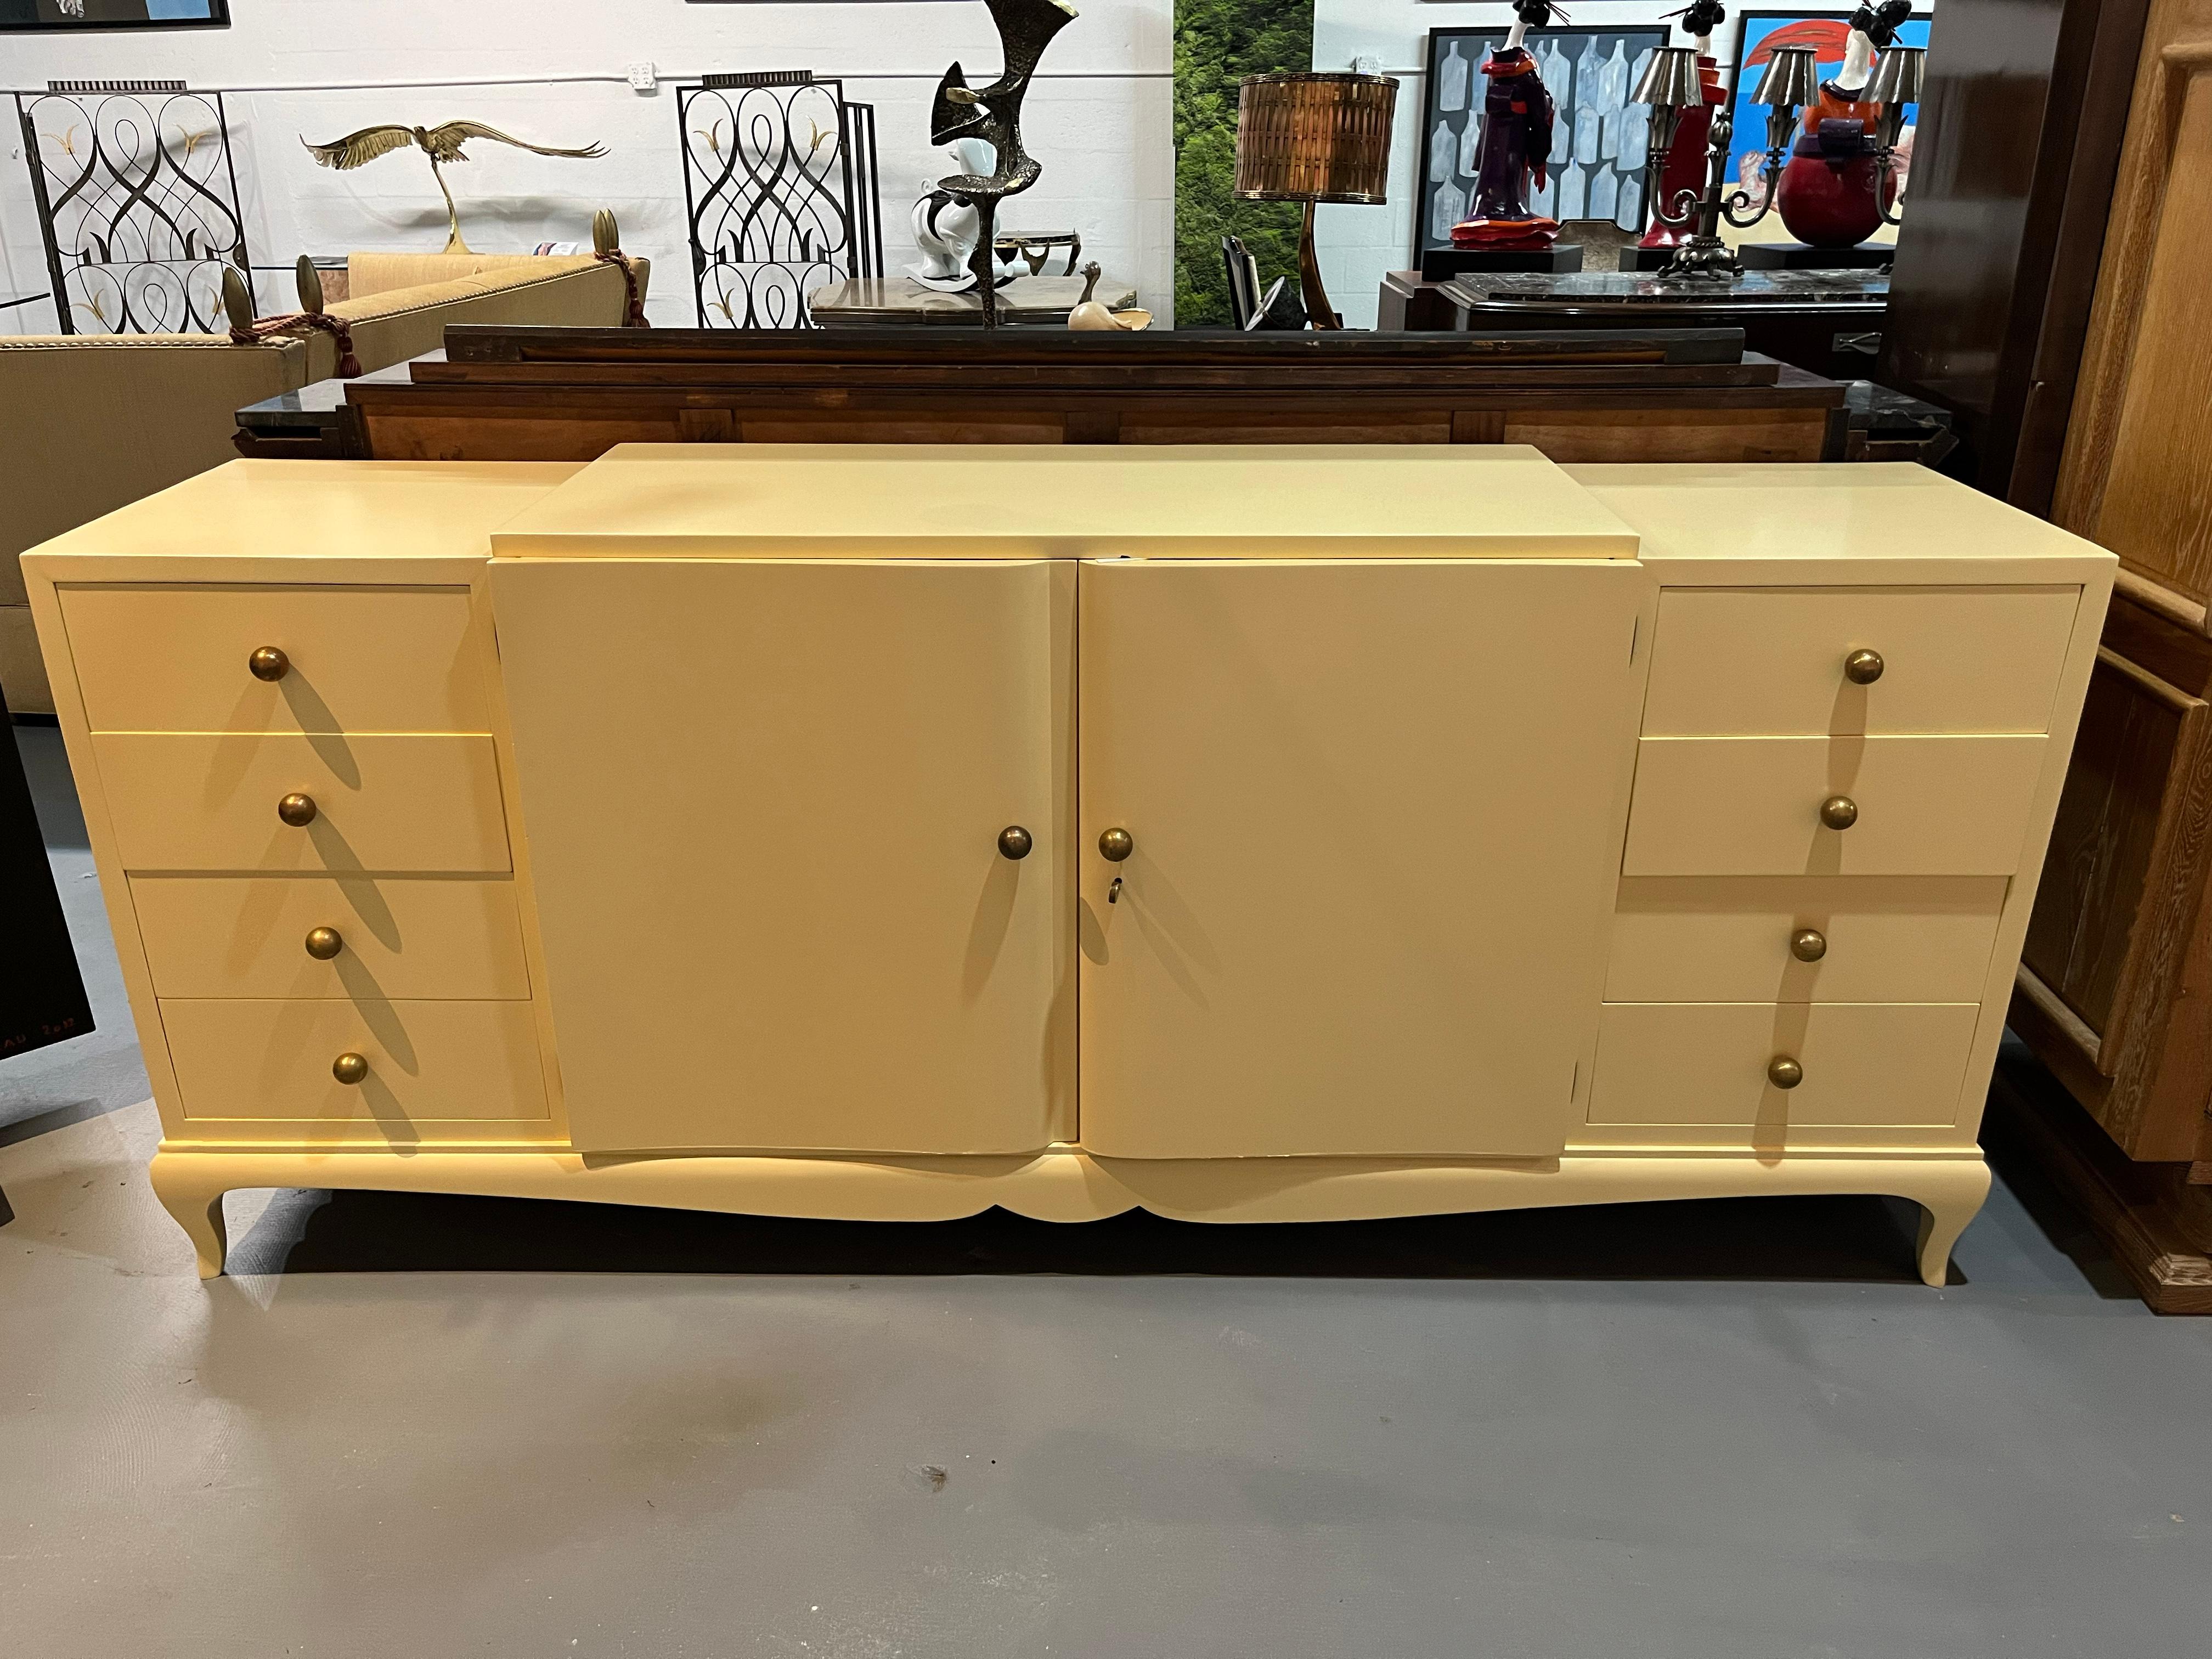 This timeless and sophisticated sideboard was created in the style of celebrated 20th century sculpter and architect André Arbus. A master of simple elegance, The ivory lacquered wood of the chest has a smooth finish that gives a beautiful shine in